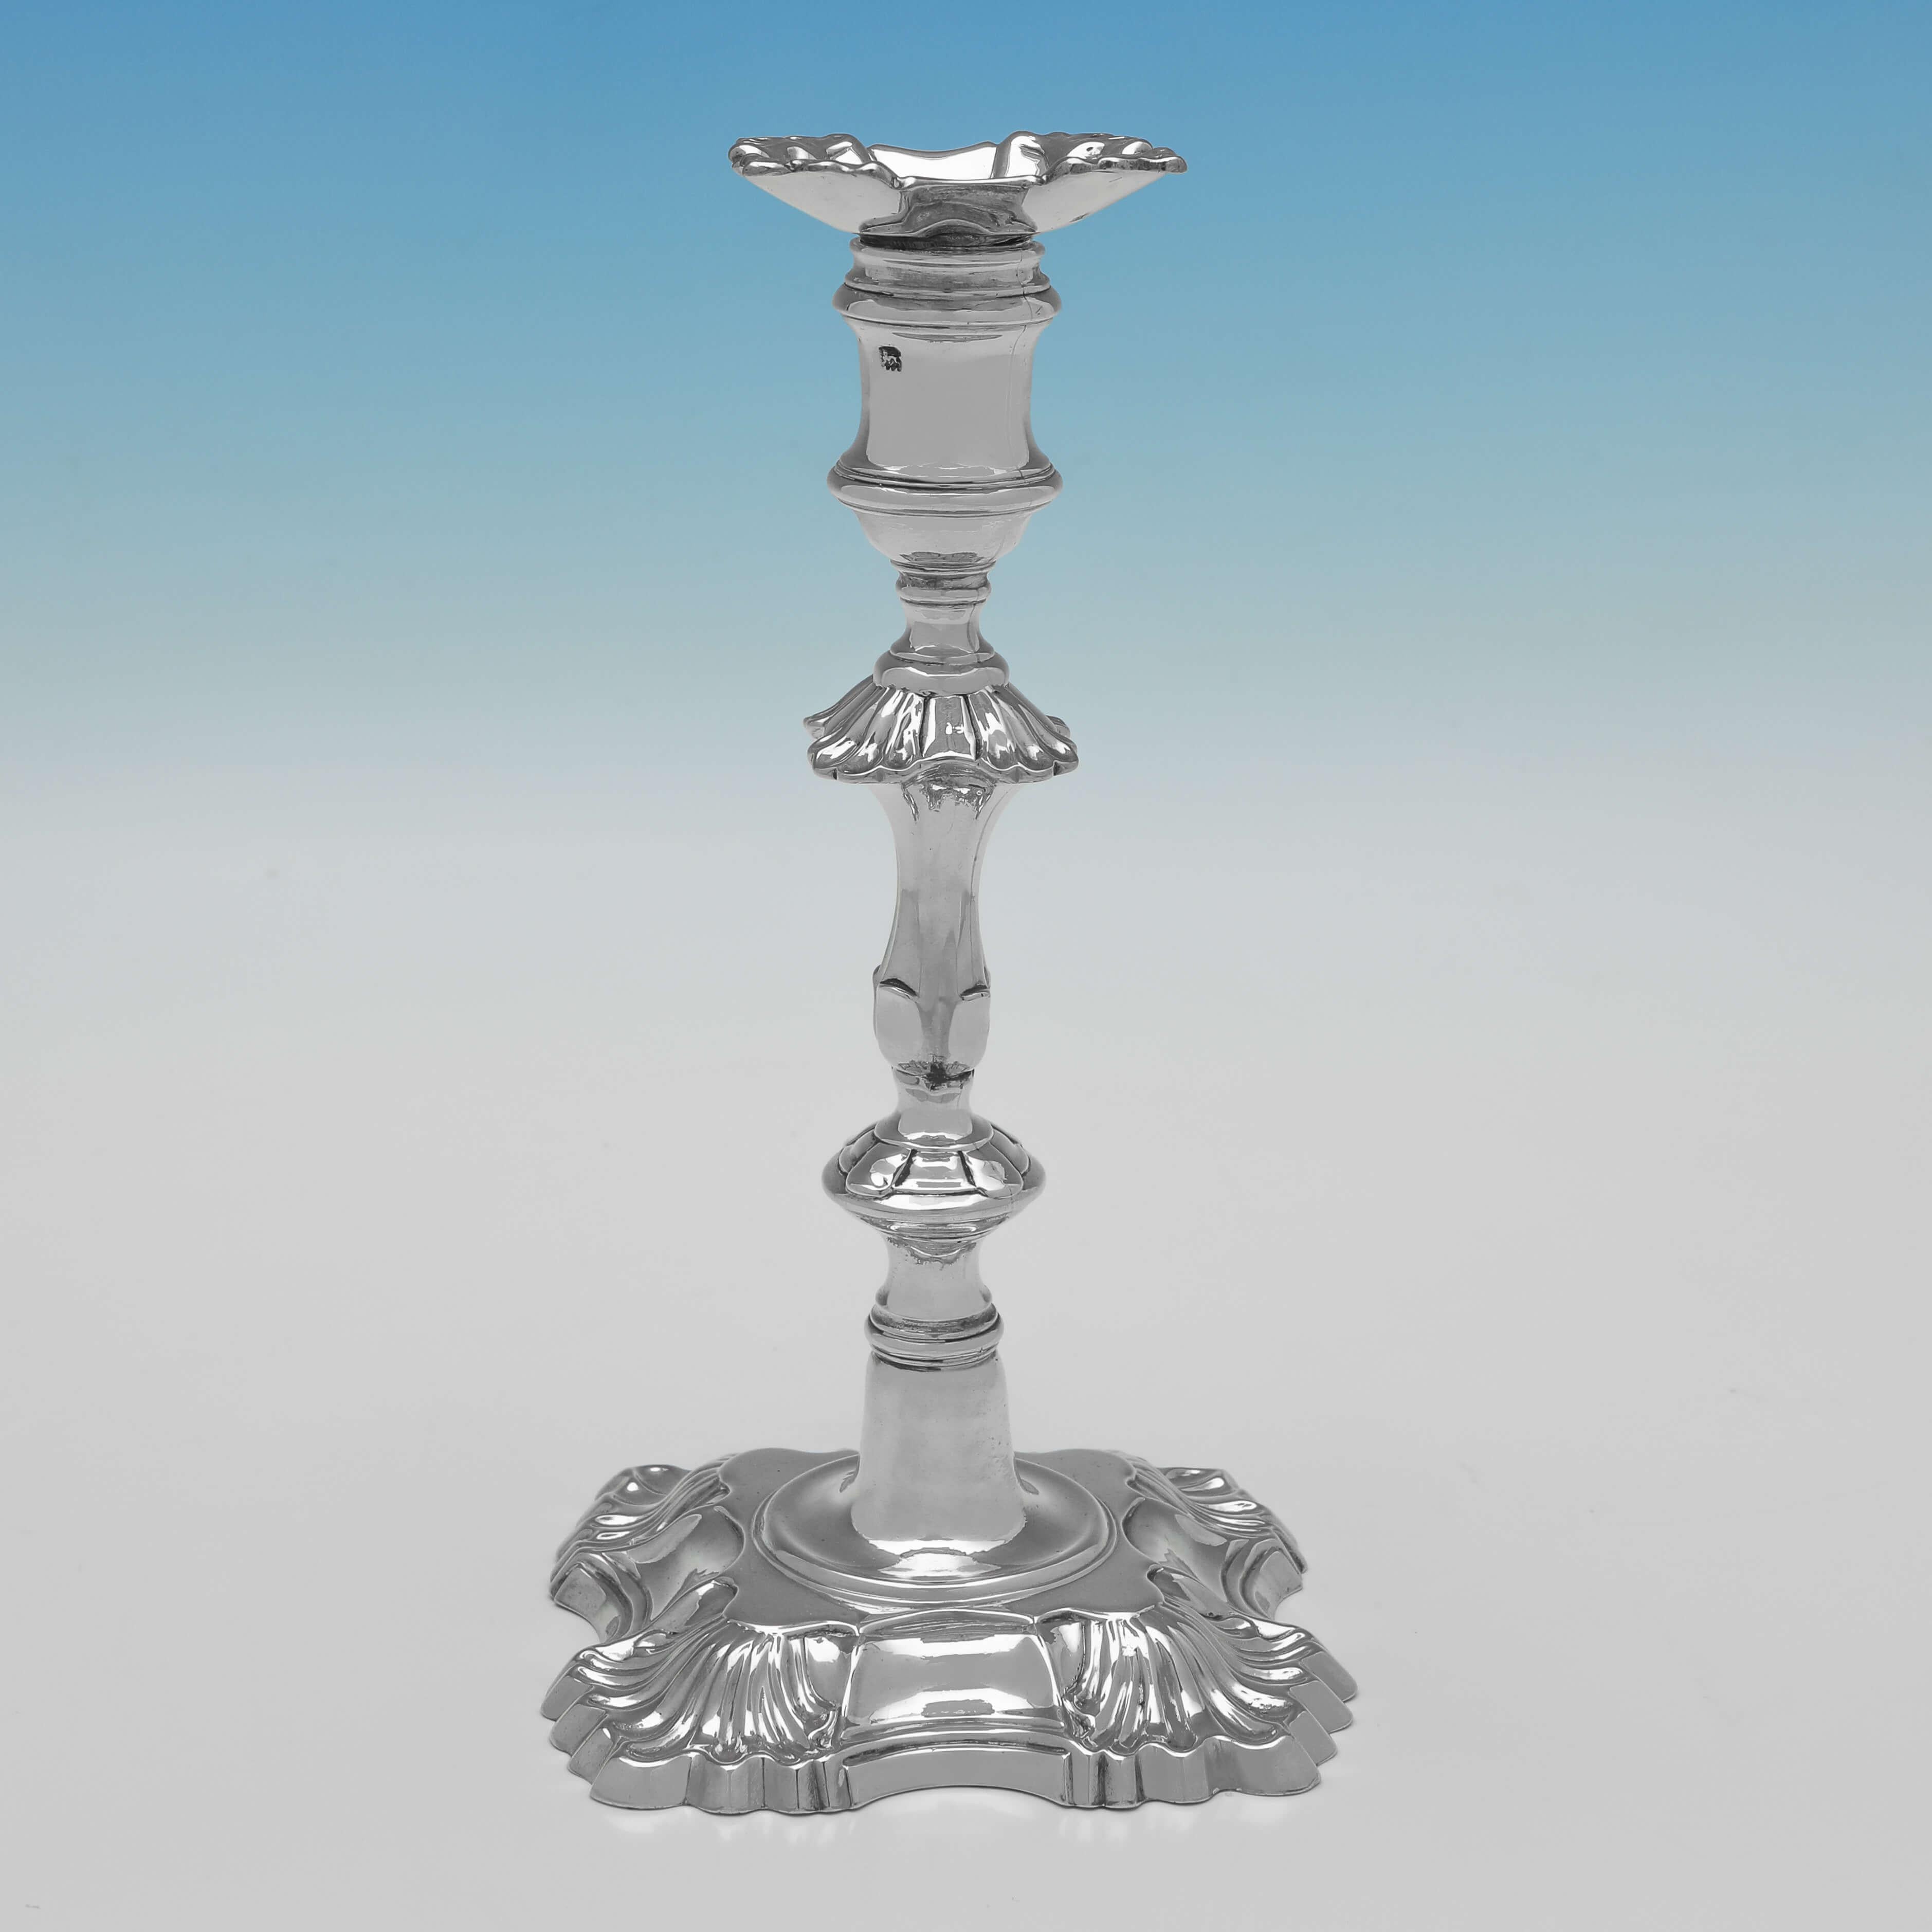 Hallmarked in London in 1753 by John Priest, this striking set of four George II, Antique Sterling Silver Candlesticks, are in the 'Four Shell' style, and feature removable nozzles. 

Each candlestick measures 8.5